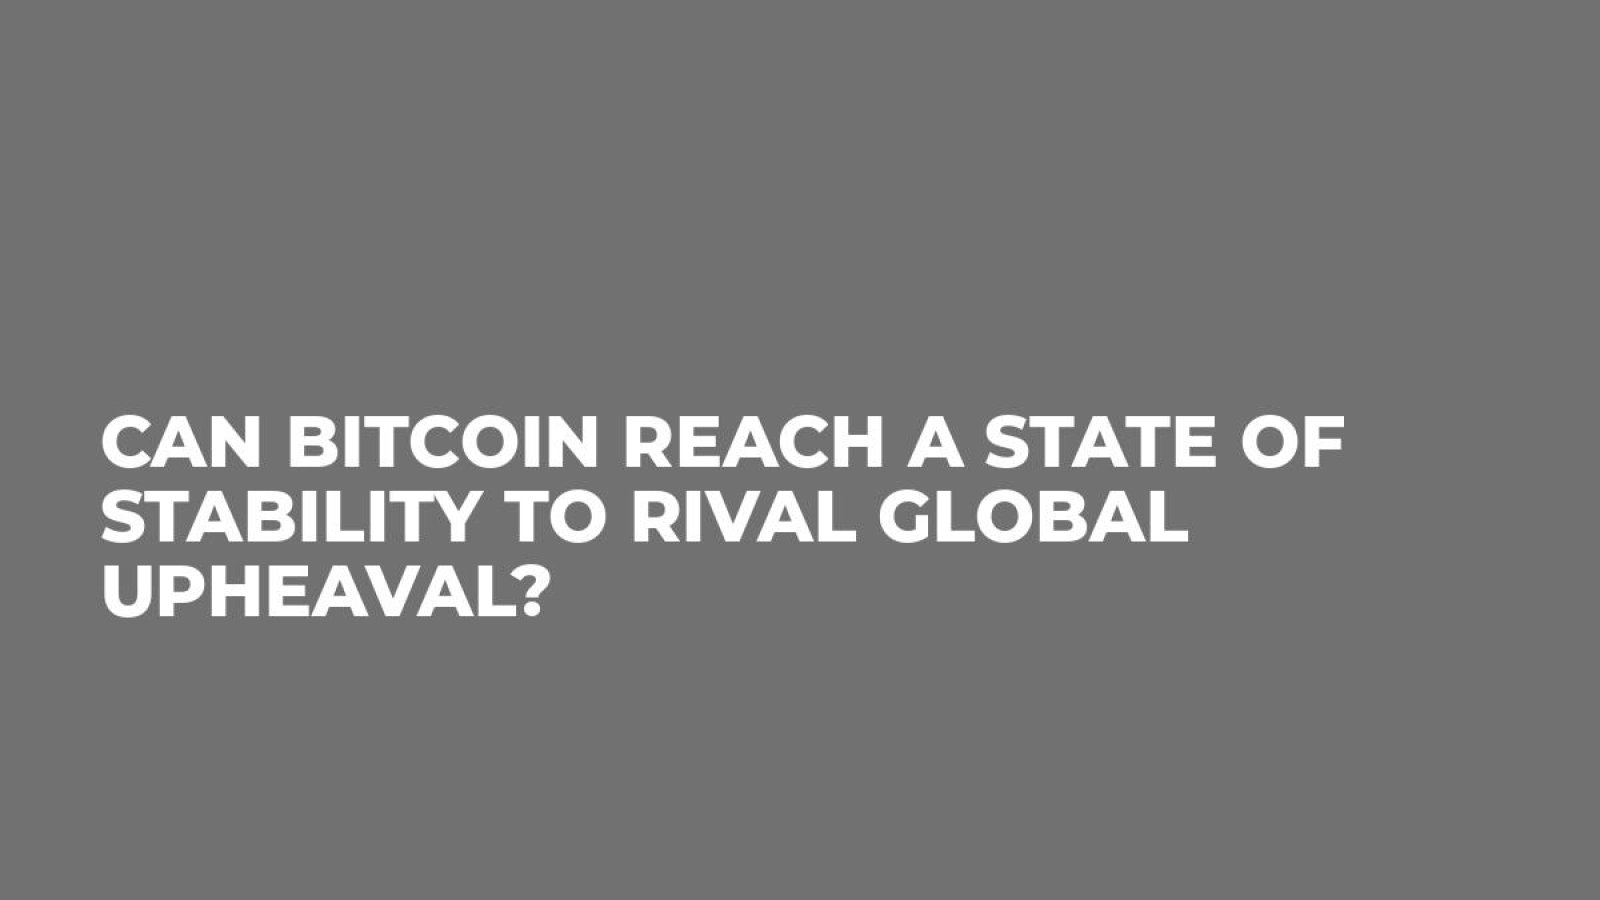 Can Bitcoin Reach a State of Stability to Rival Global Upheaval?